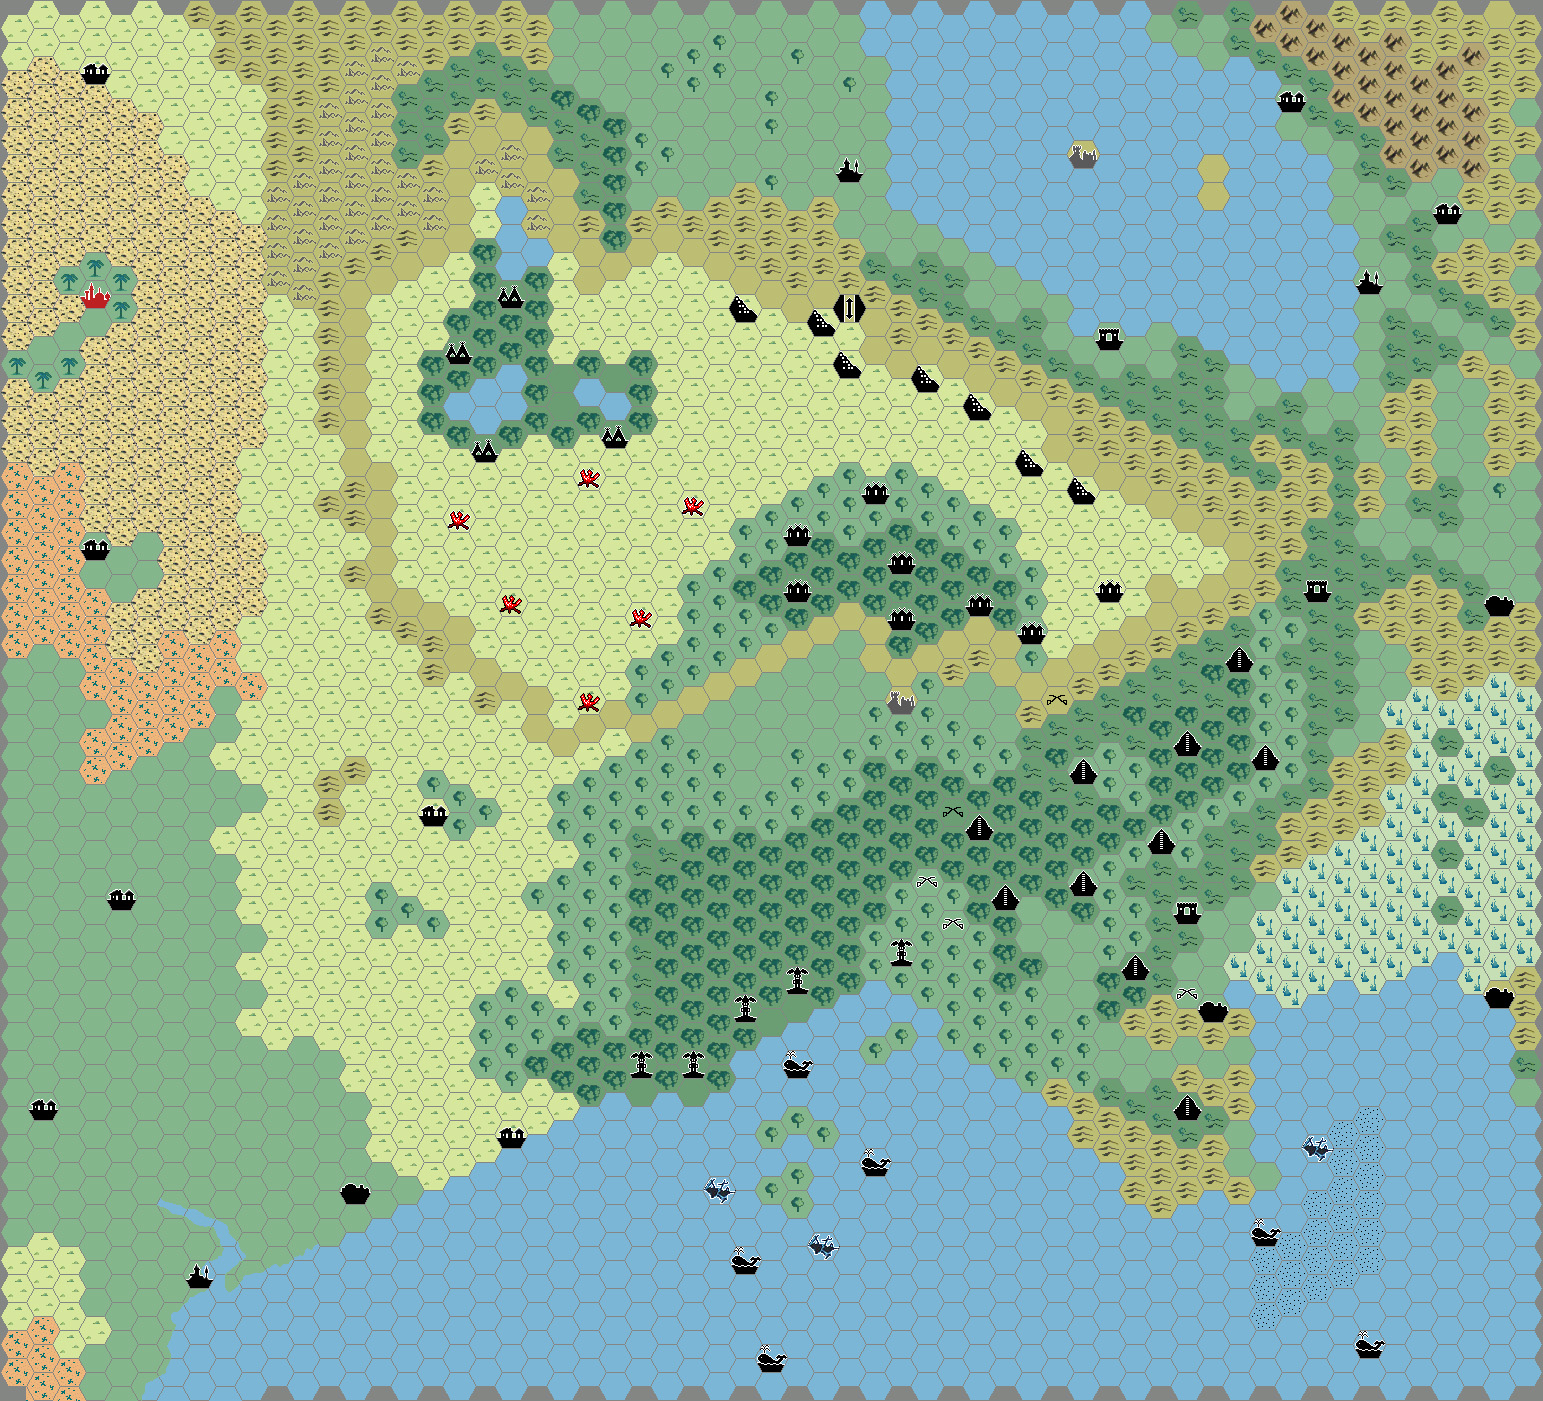 The Atruaghin Clans, 8 miles per hex by Thibault Sarlat, July 2005